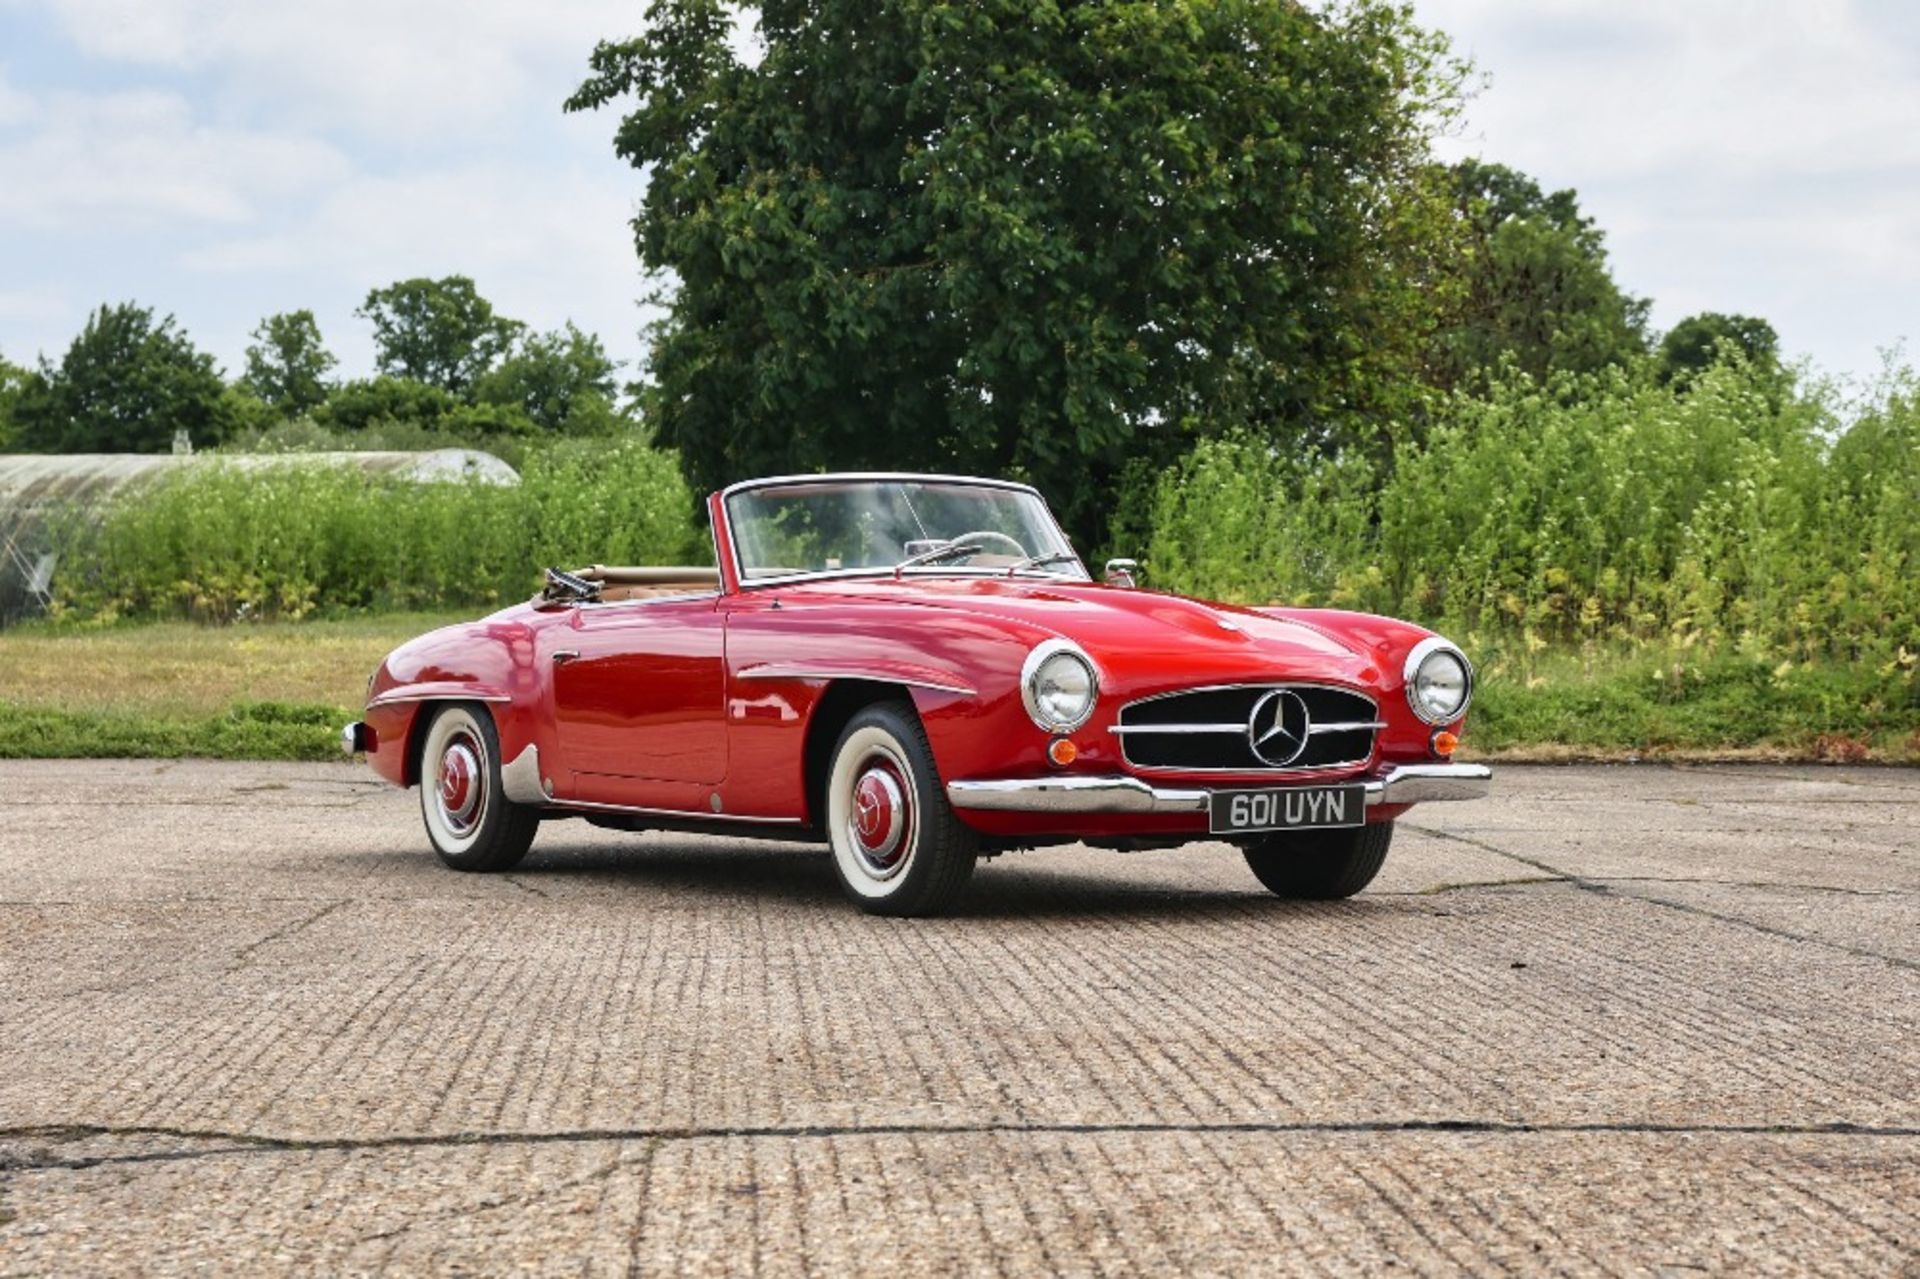 1958 MERCEDES-BENZ 190SL Registration Number: 601 UYN Chassis Number: 121.040.8500635 Recorded - Image 2 of 23